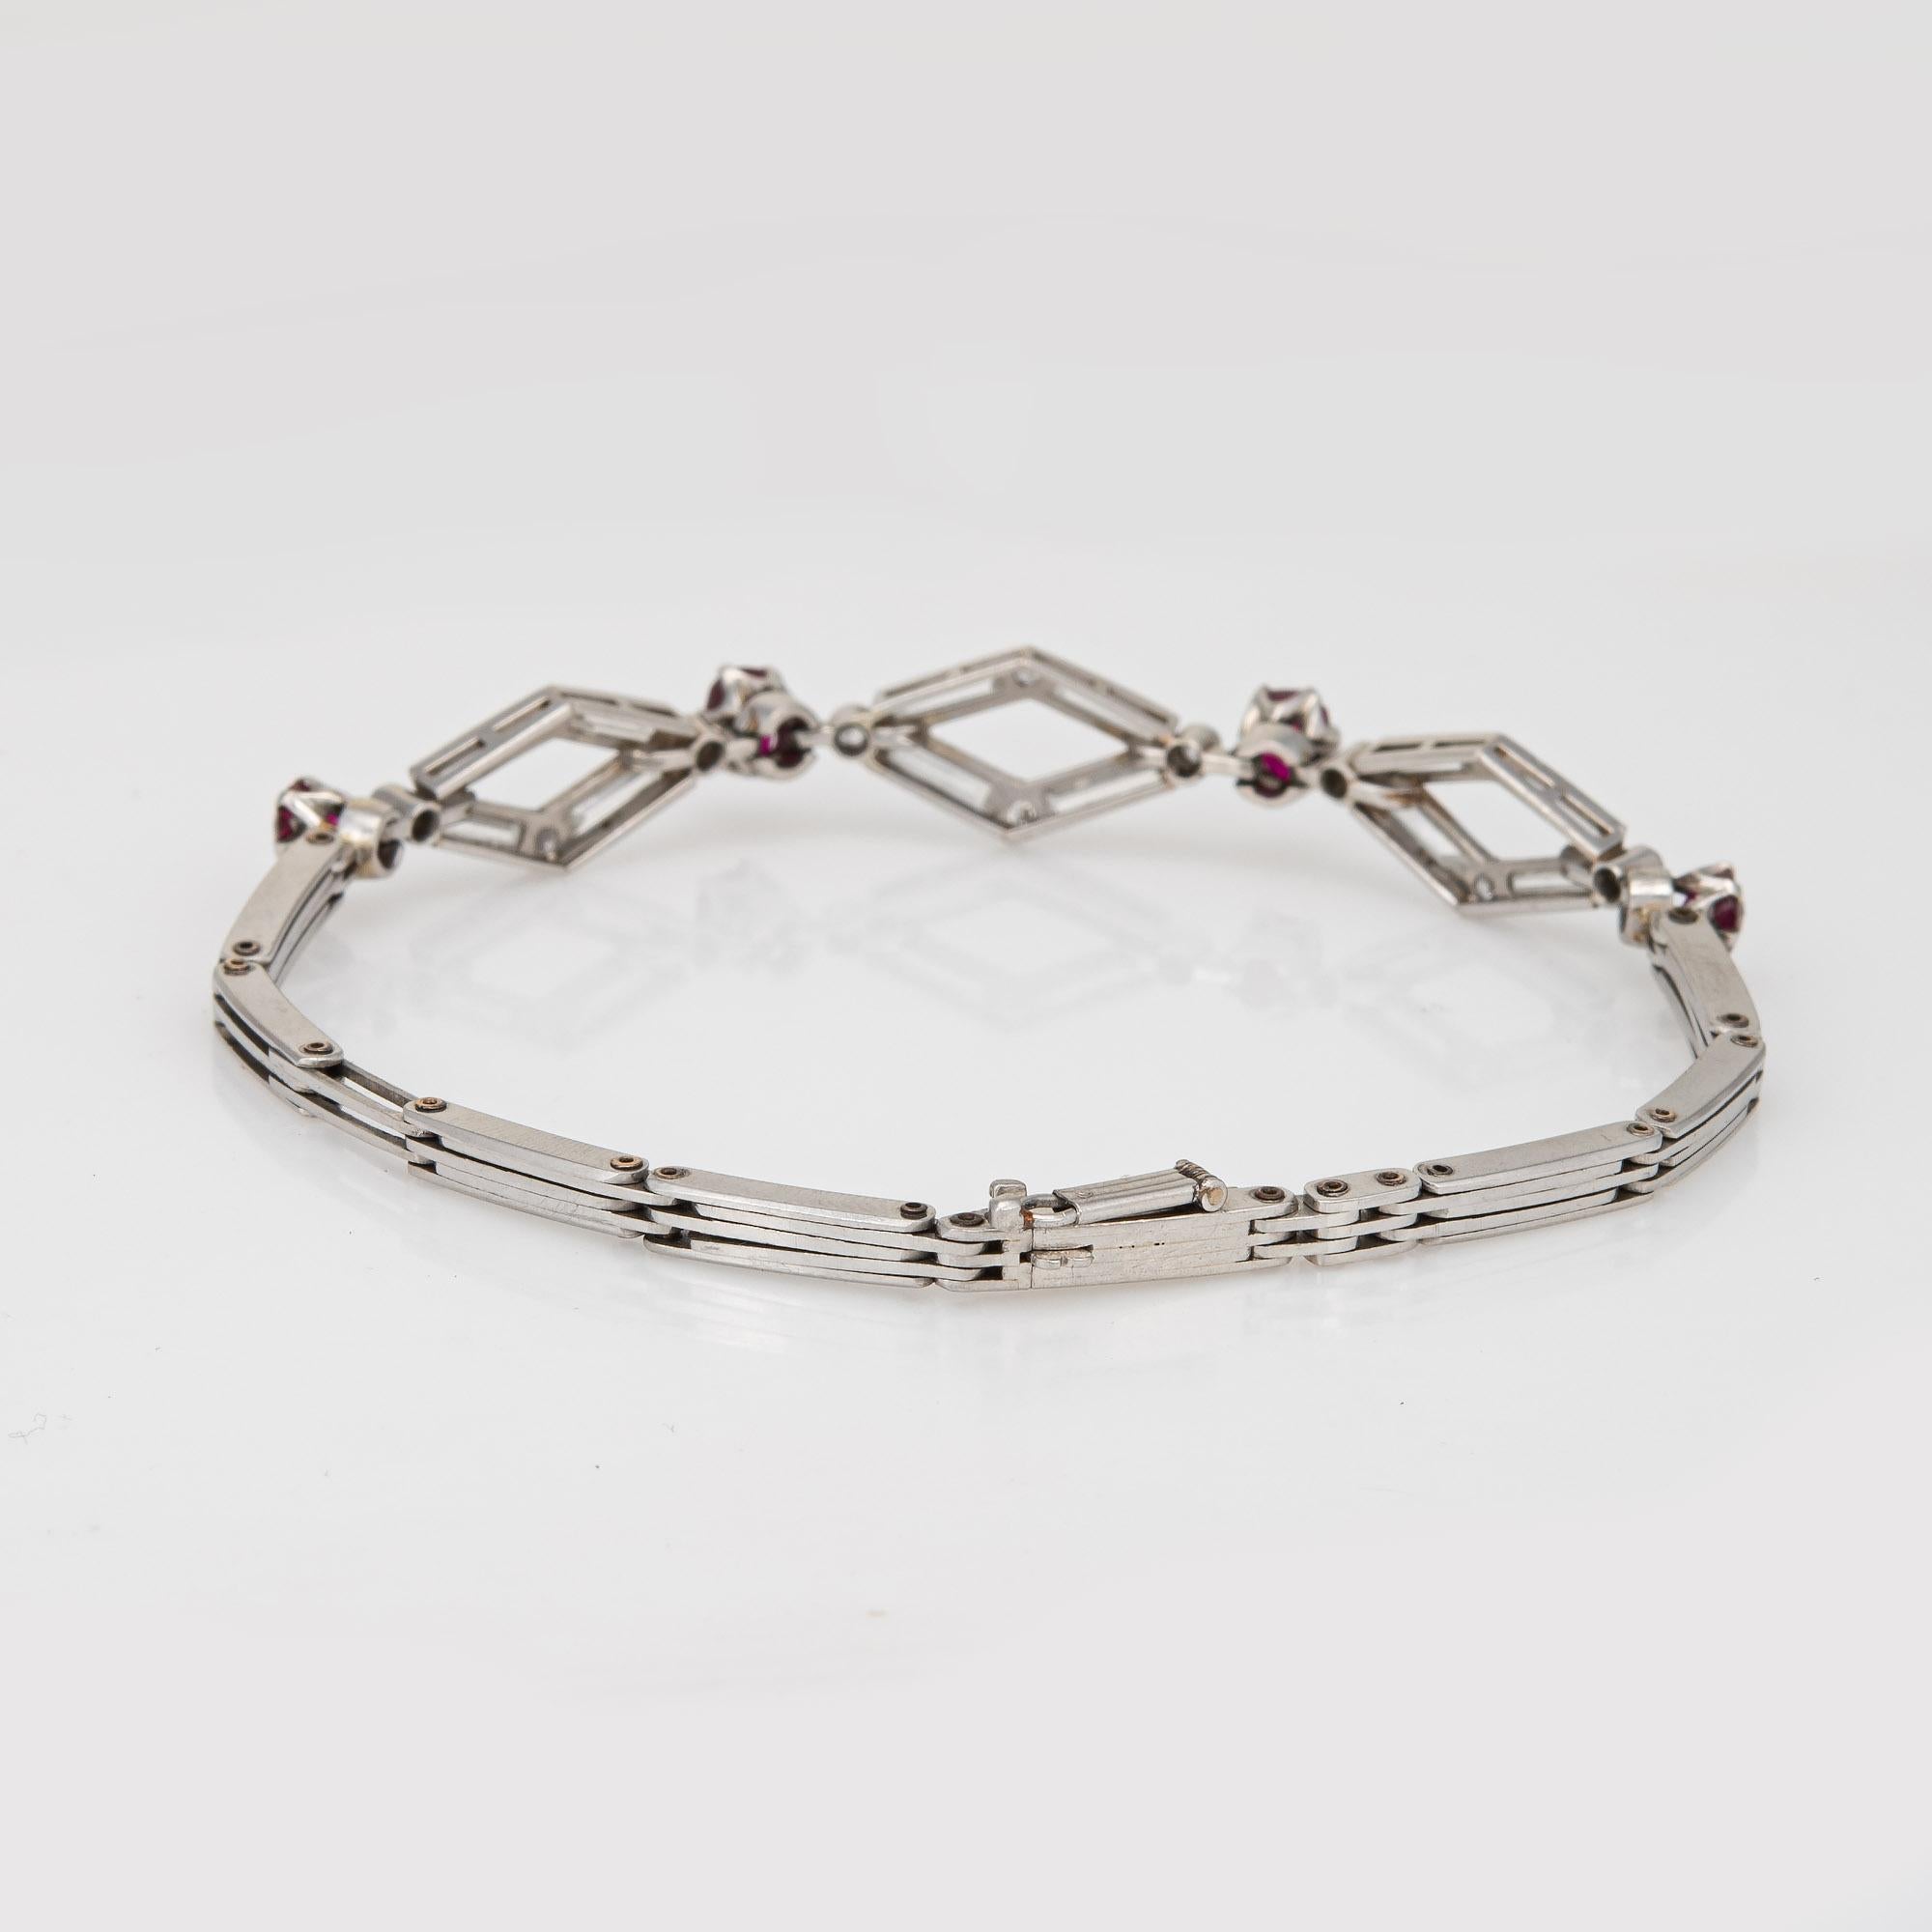 Finely detailed vintage Art Deco era ruby & diamond bracelet crafted in 900 platinum (circa 1920s to 1930s).  

Straight baguette & old european cut diamonds total an estimated 1.20 carats (estimated at H-I color and VS2-SI1 clarity). Four rubies